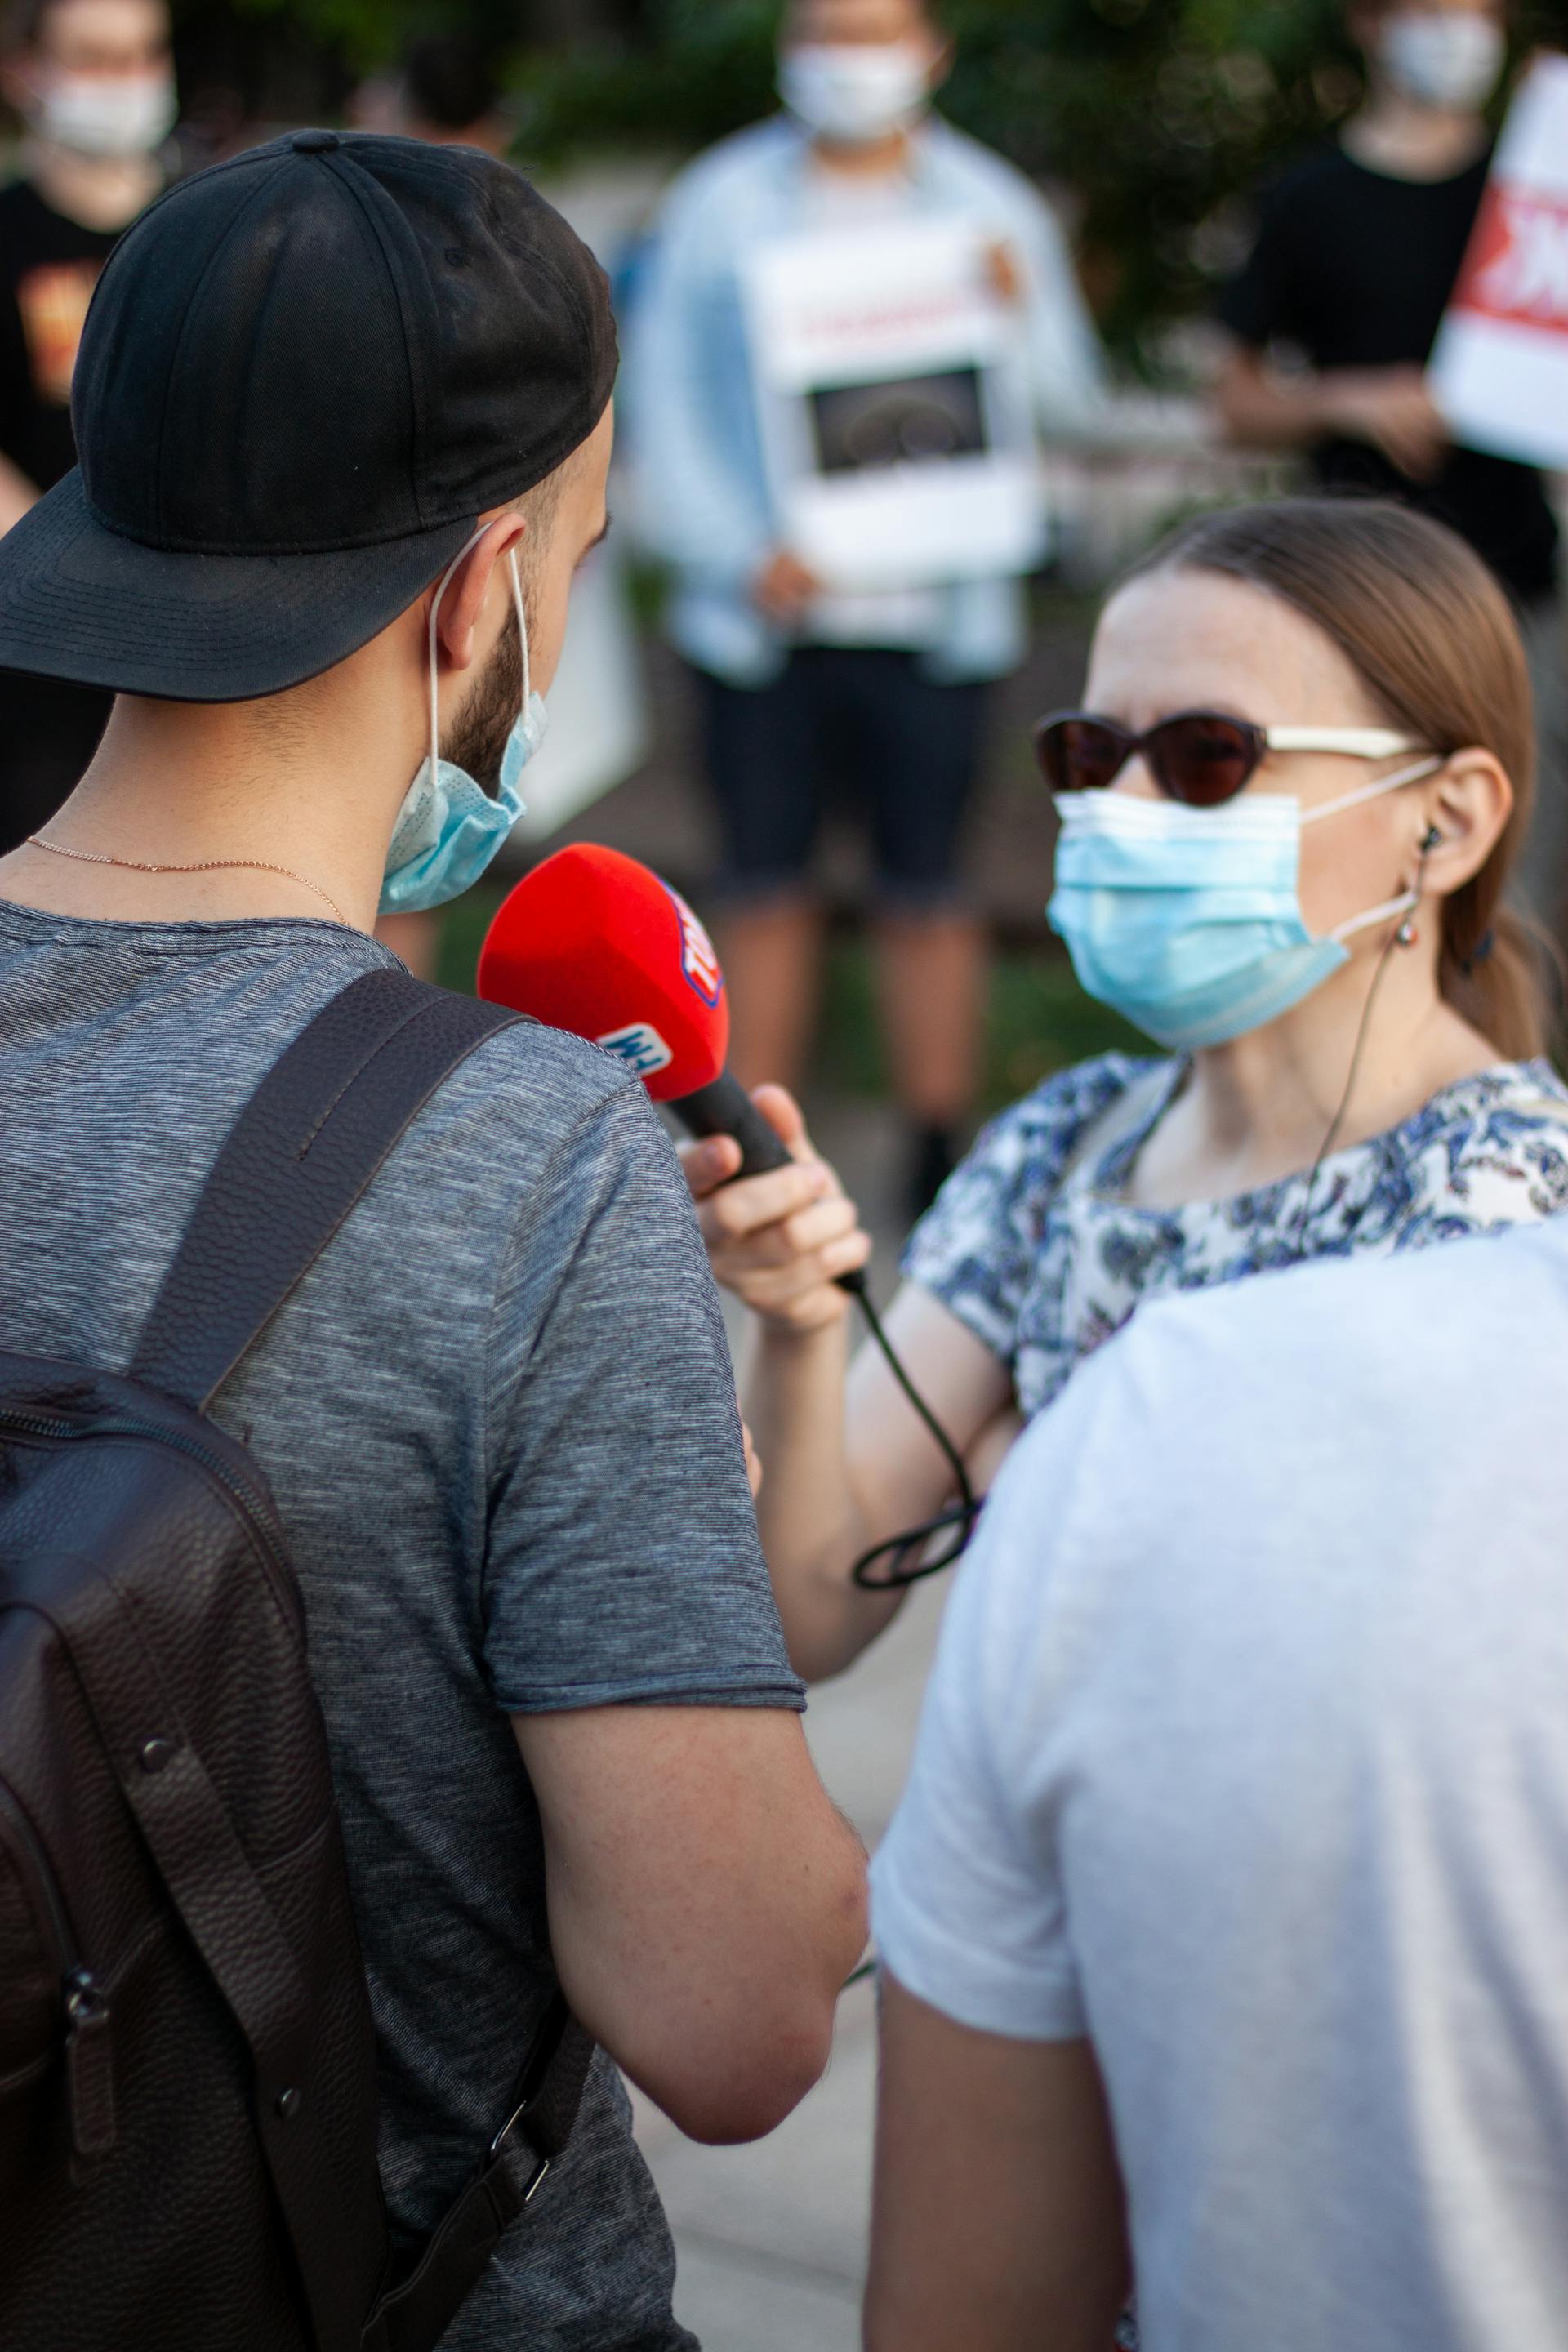 A person doing a street interview | Source: Pexels